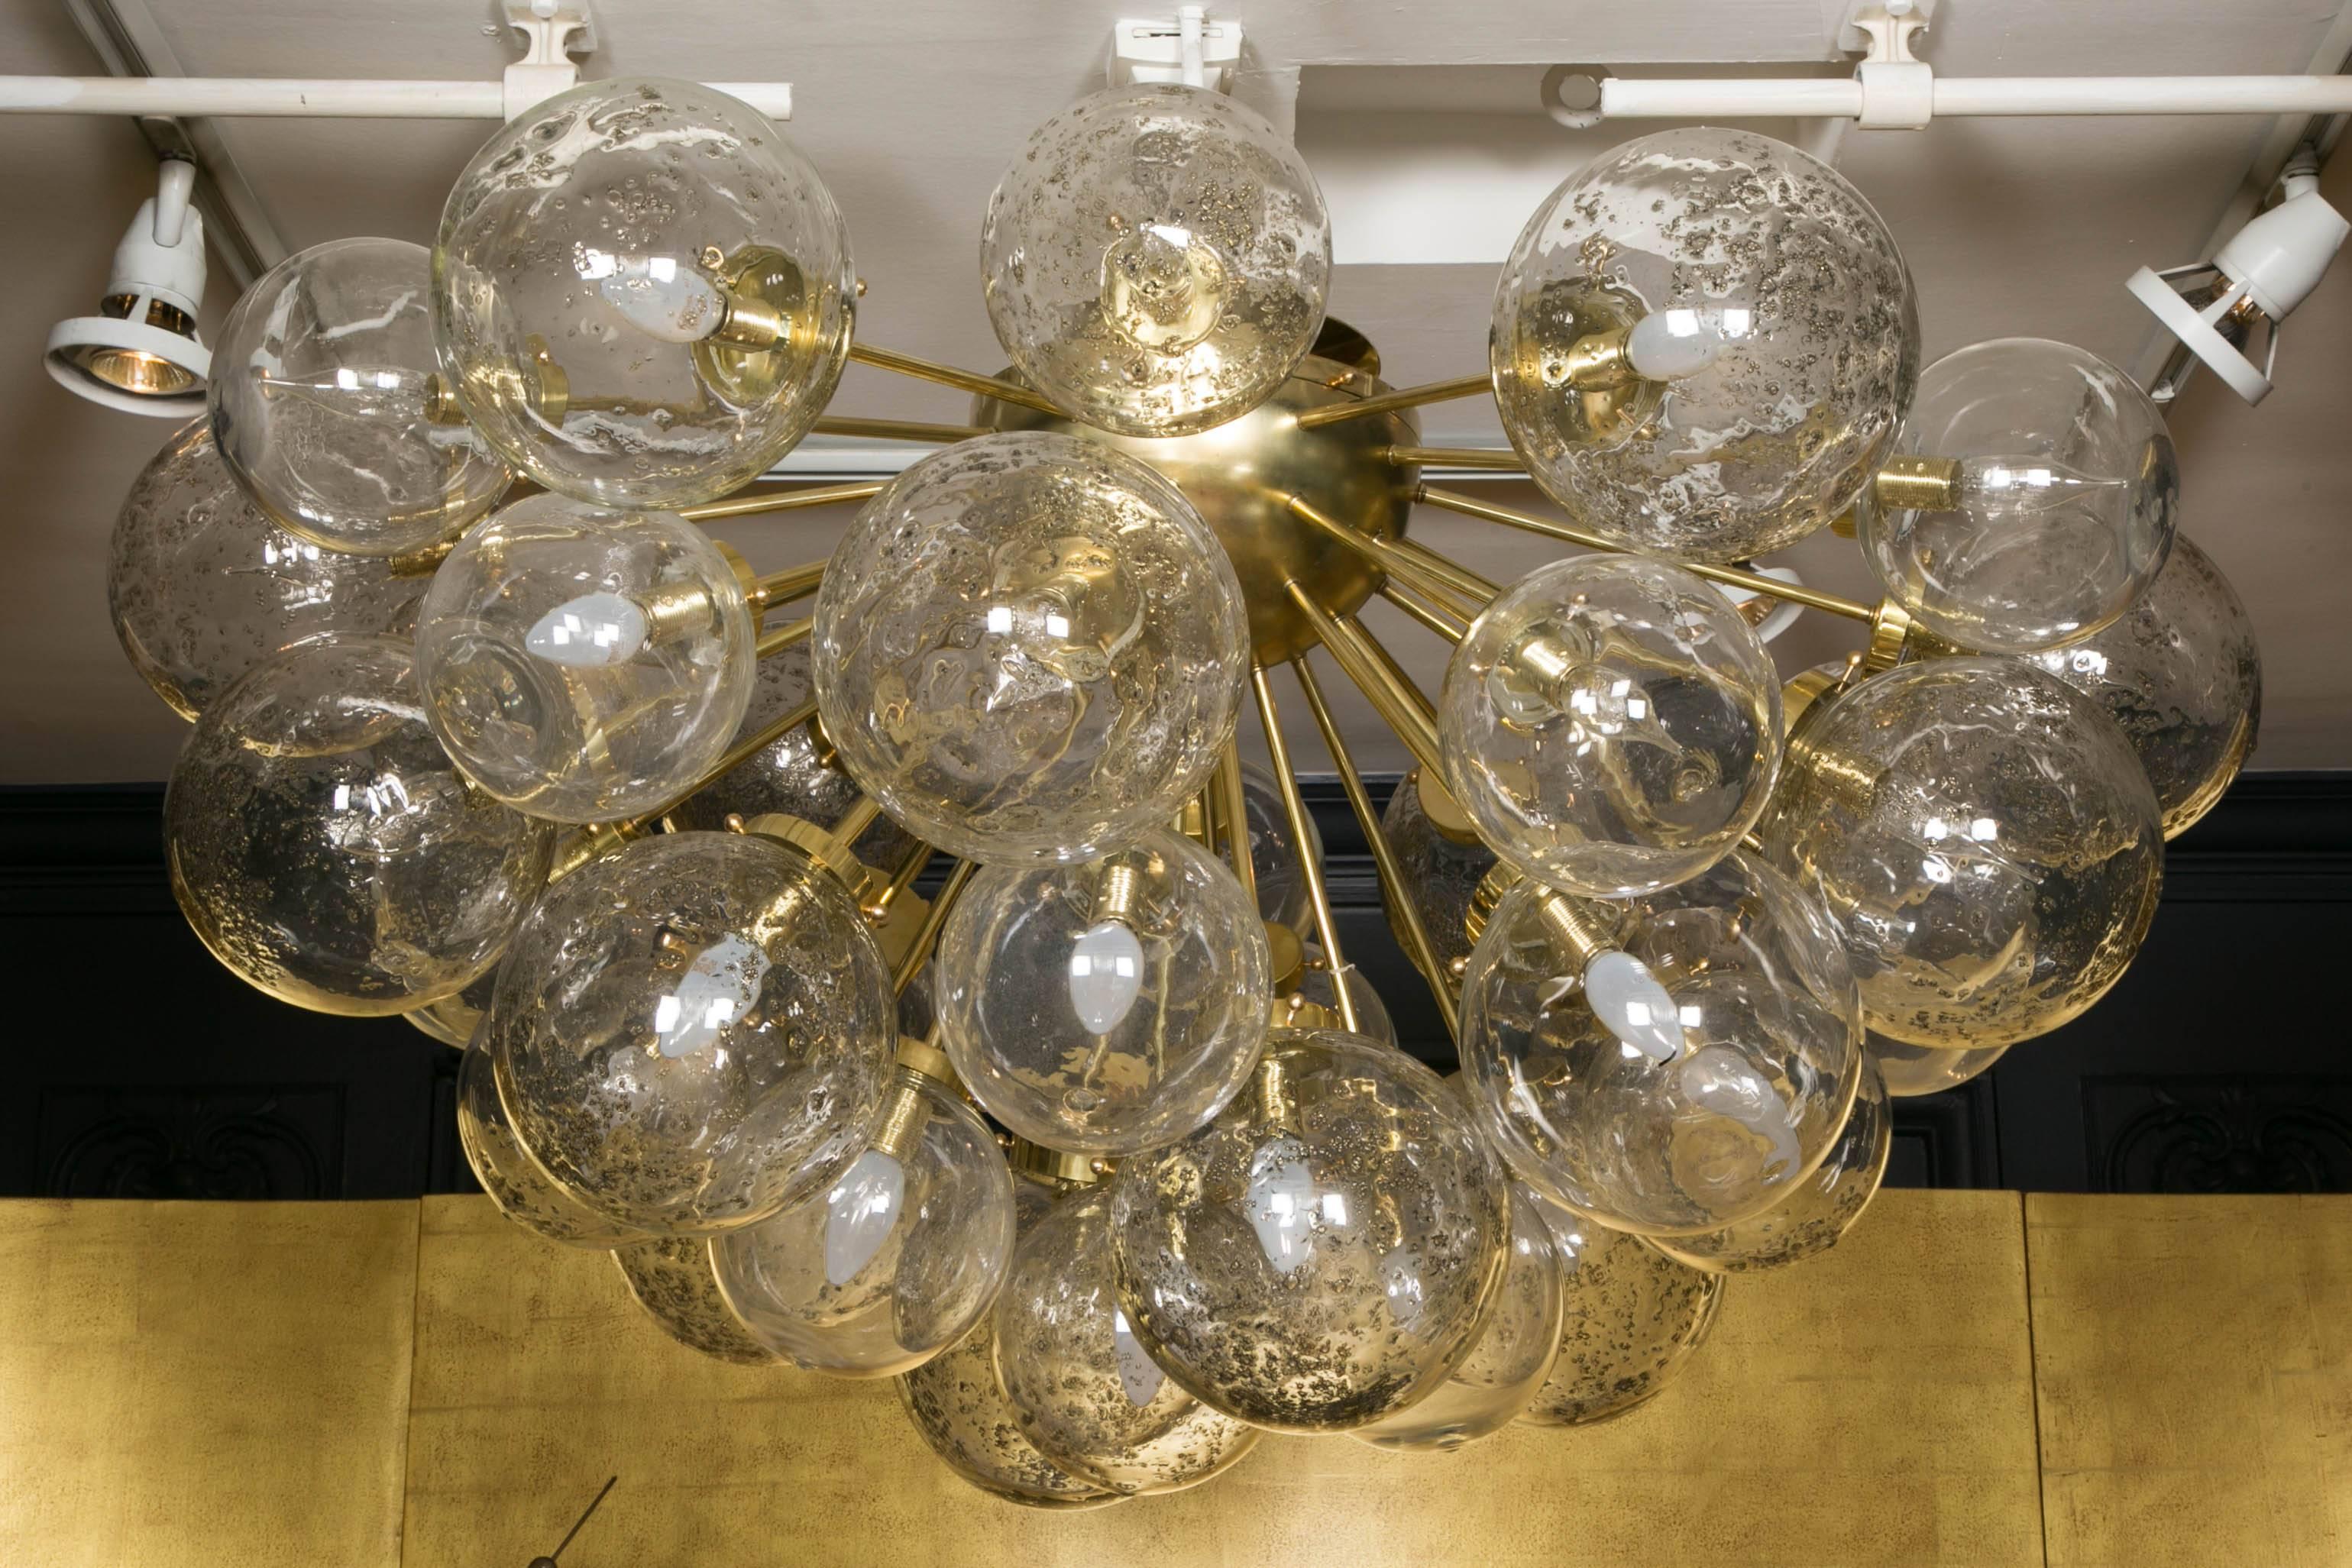 Vintage chandelier in brass and Murano blown glass balls (around 30 lights). The balls are old, the brass structure is new.